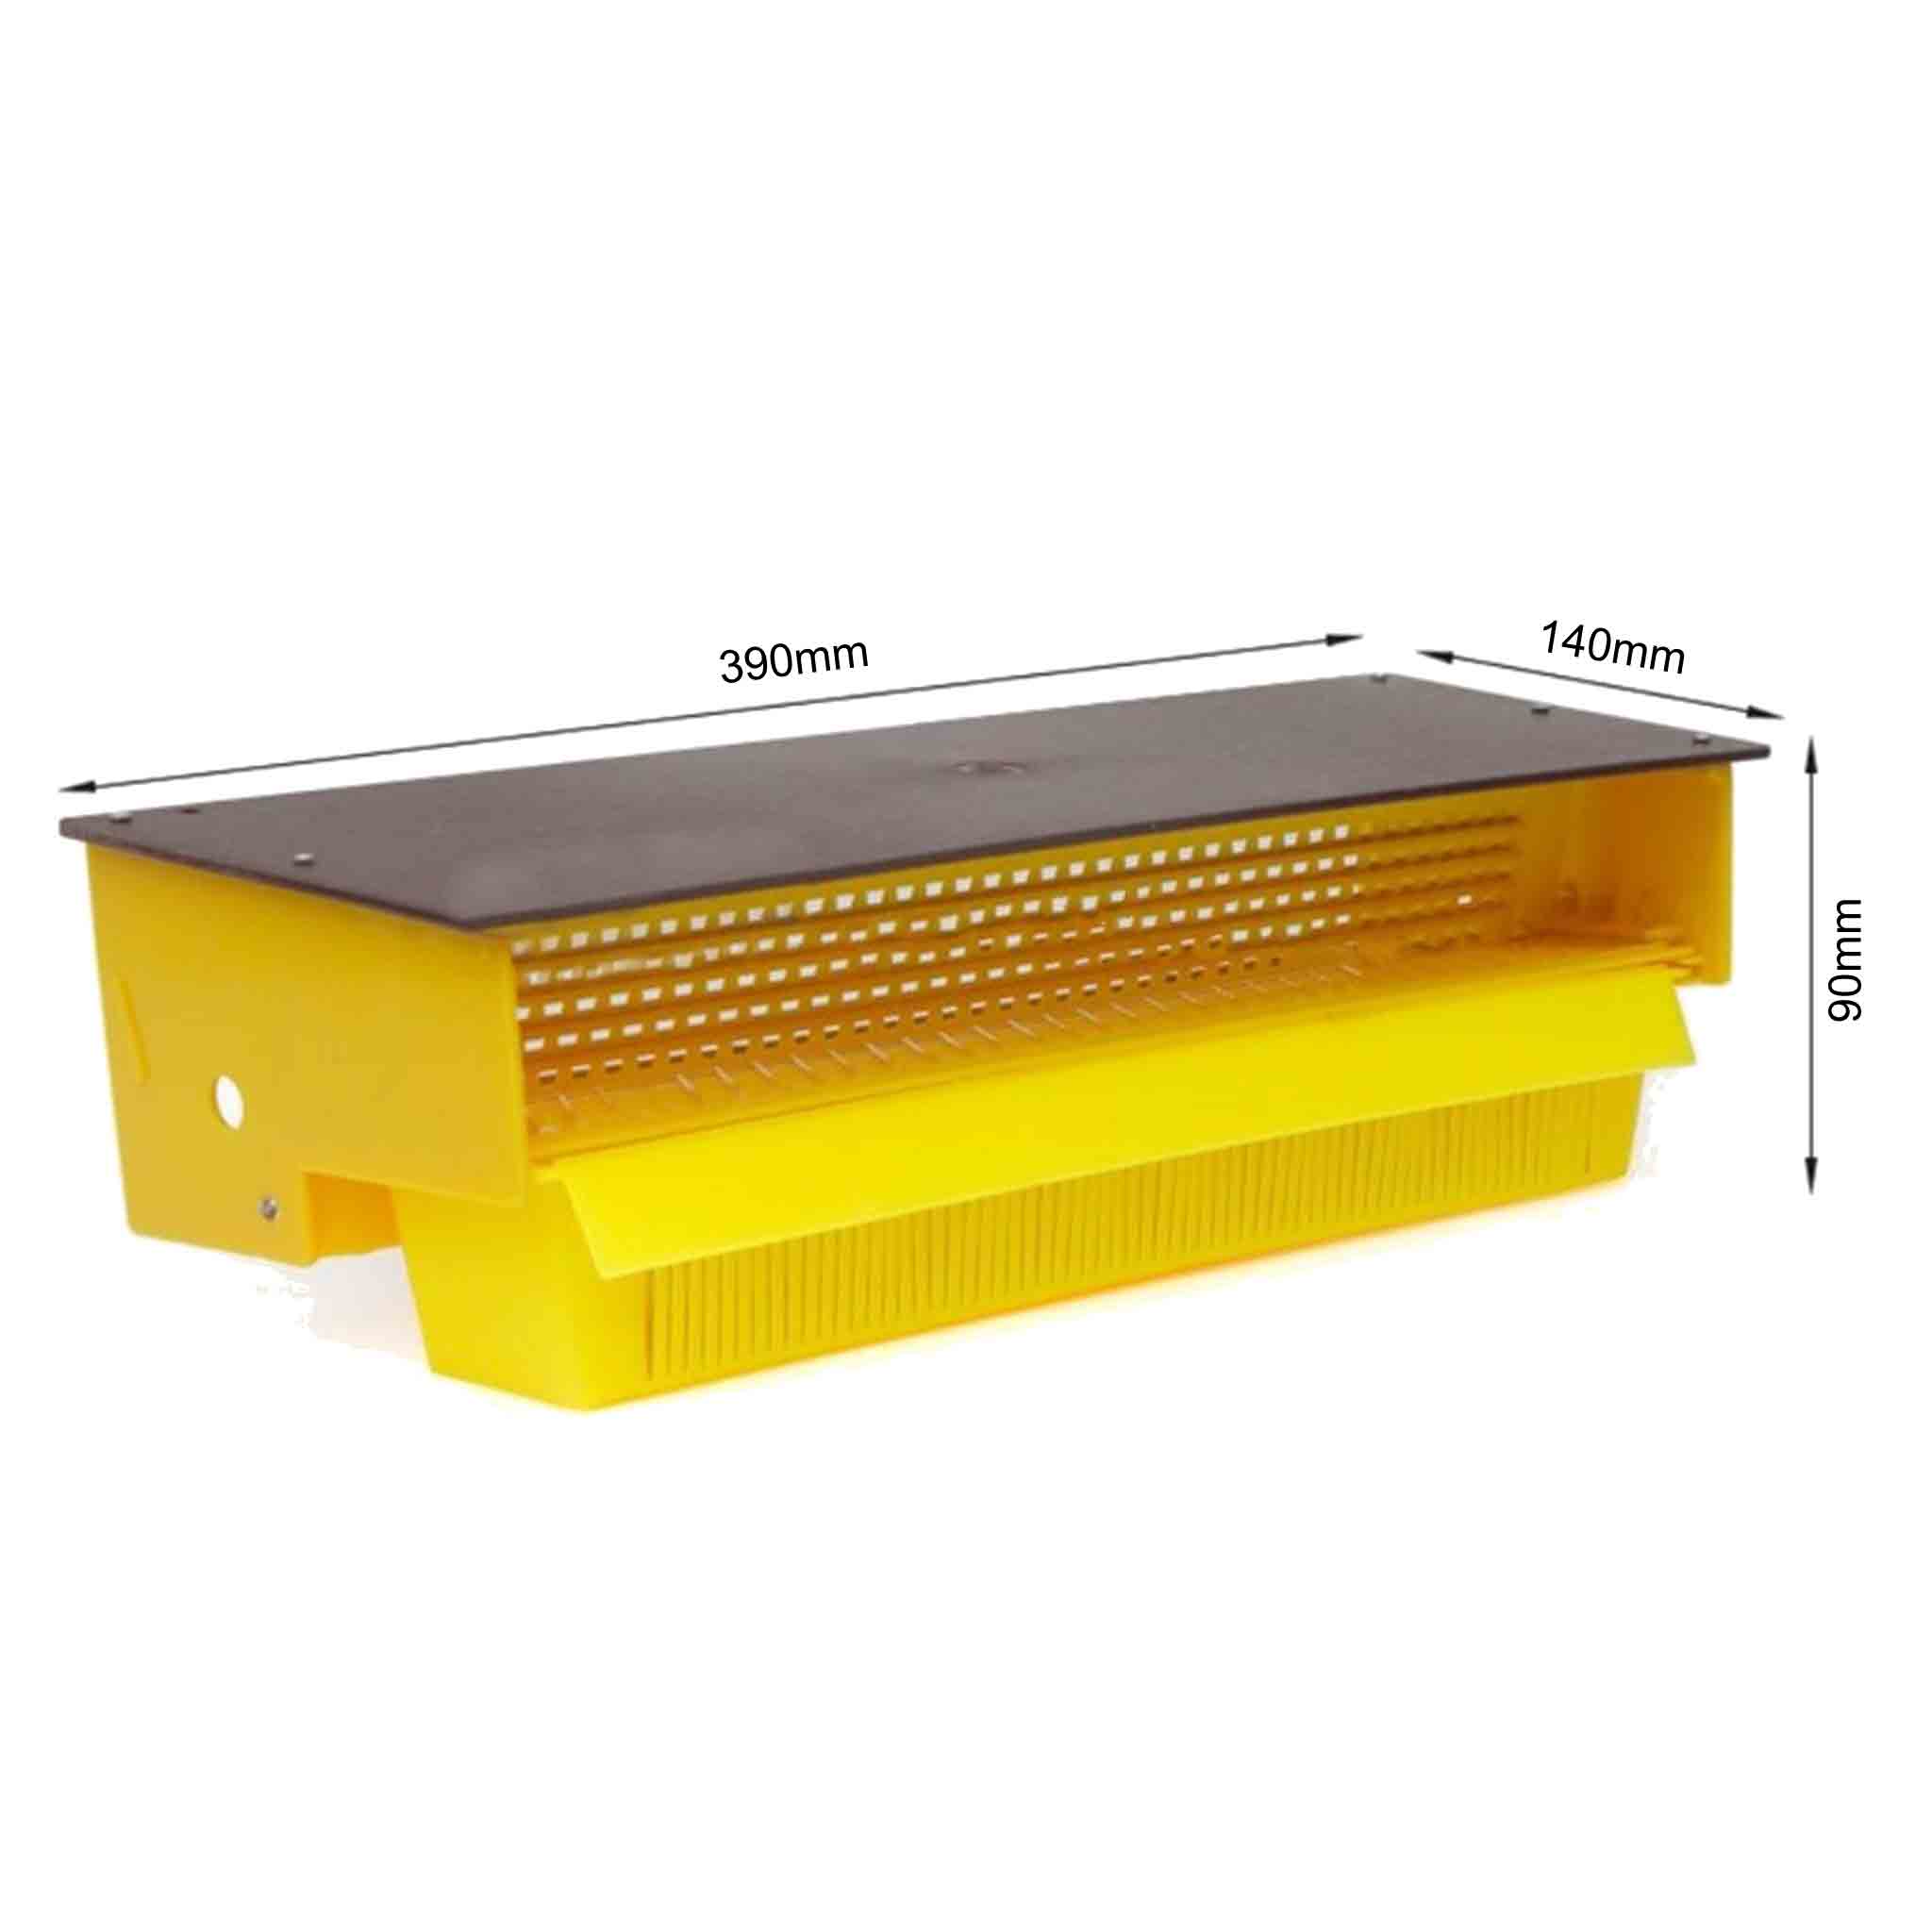 Removable Plastic Ventilated Pollen Trap/Collector with Pollen Collecting Tray - Health collection by Buzzbee Beekeeping Supplies